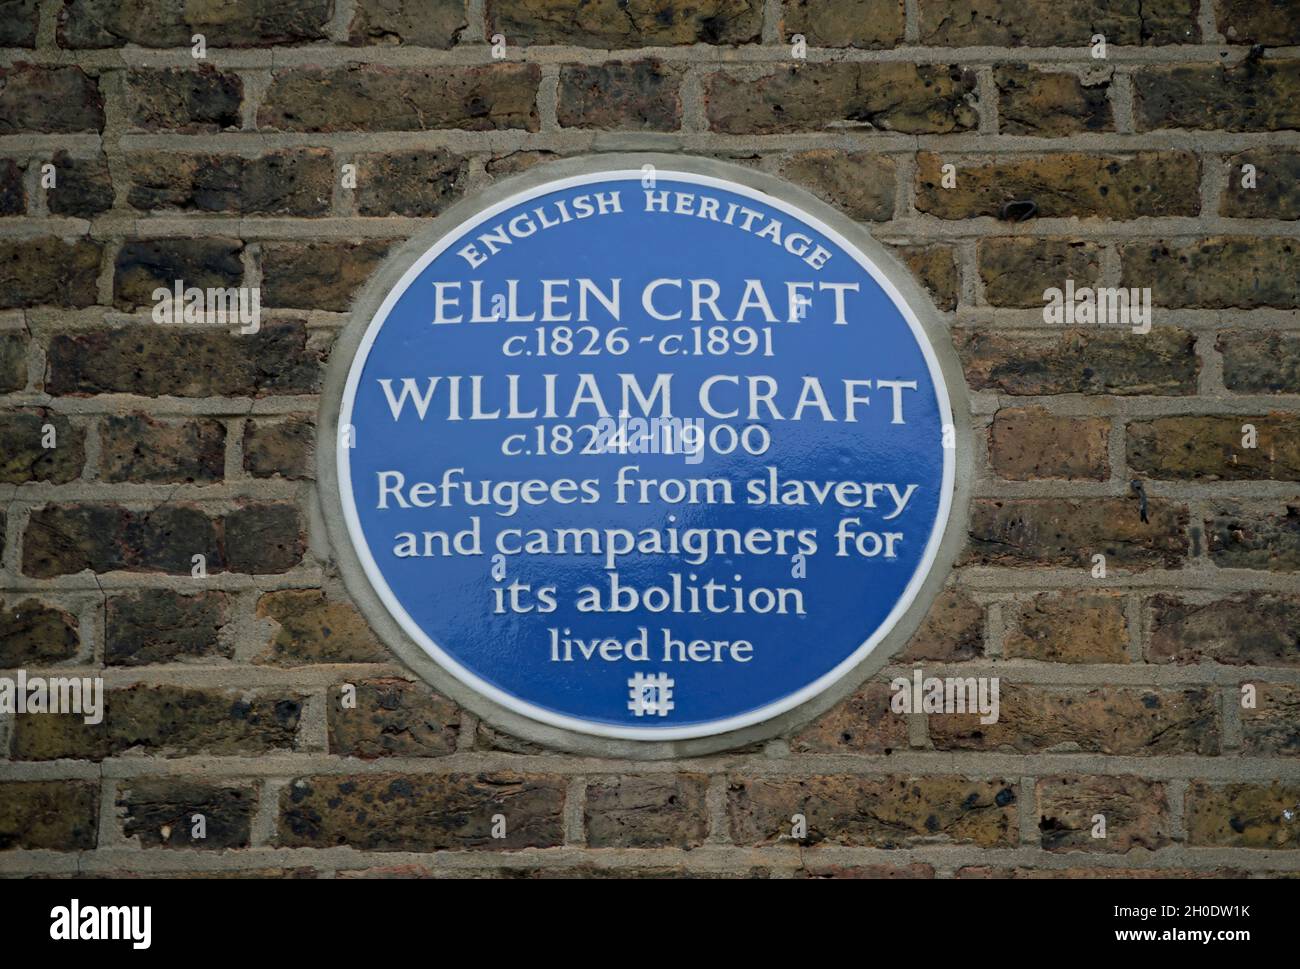 english heritage blue plaque marking a home of ellen craft and wiliam craft,  refugees from slavery and abolition campaigners, hammersmith, london Stock Photo